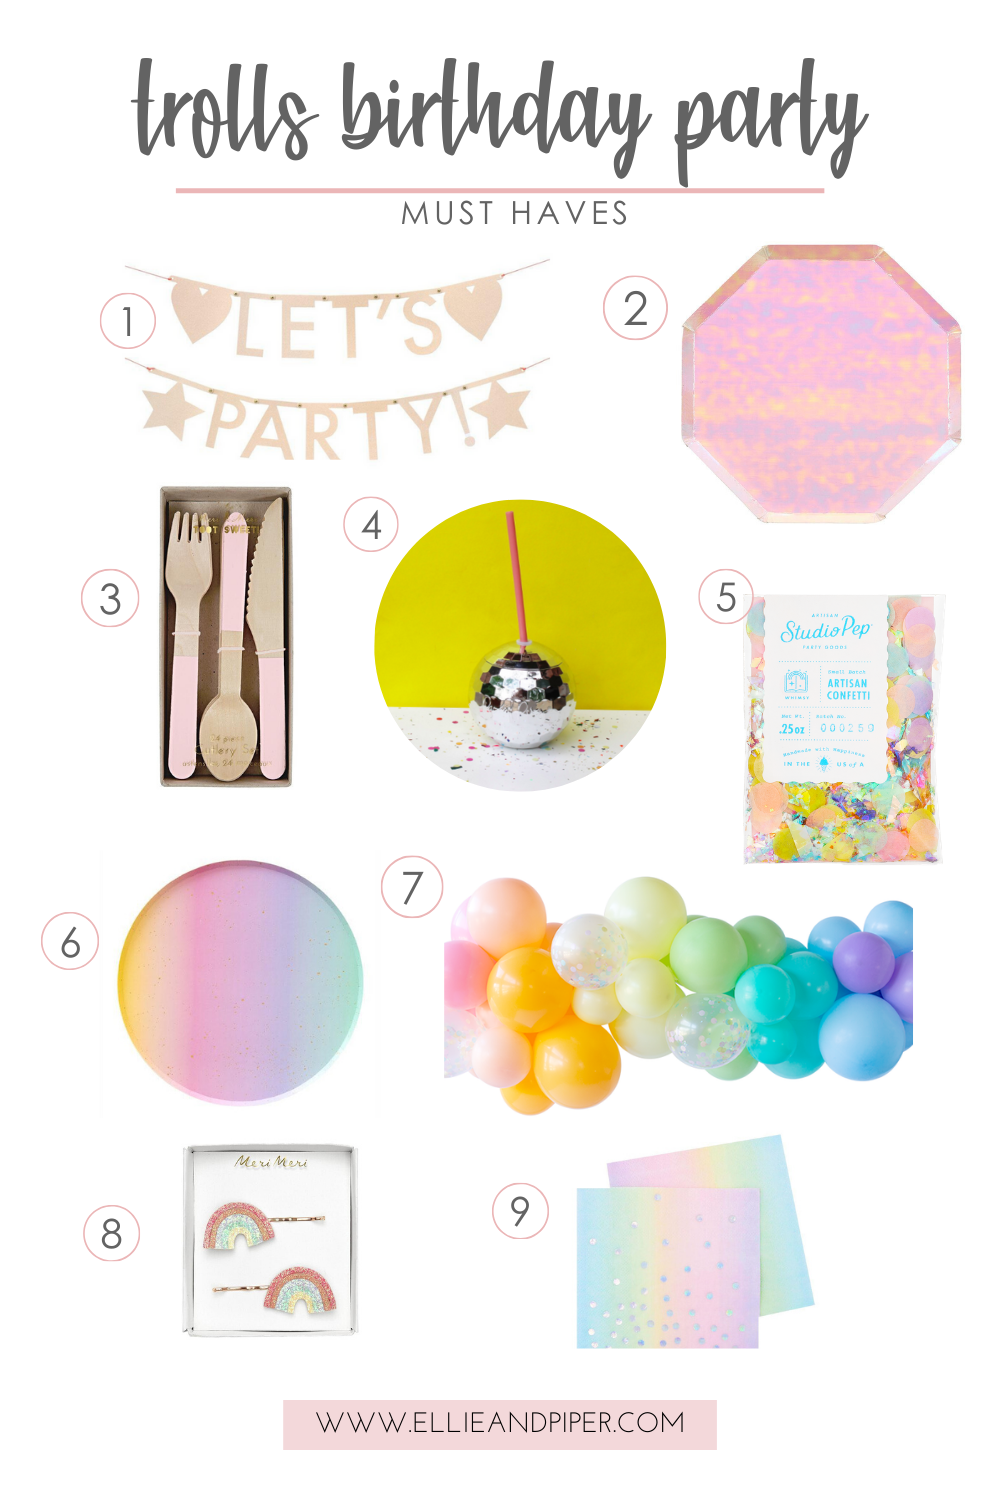 Trolls birthday part must haves from Ellie and piper 